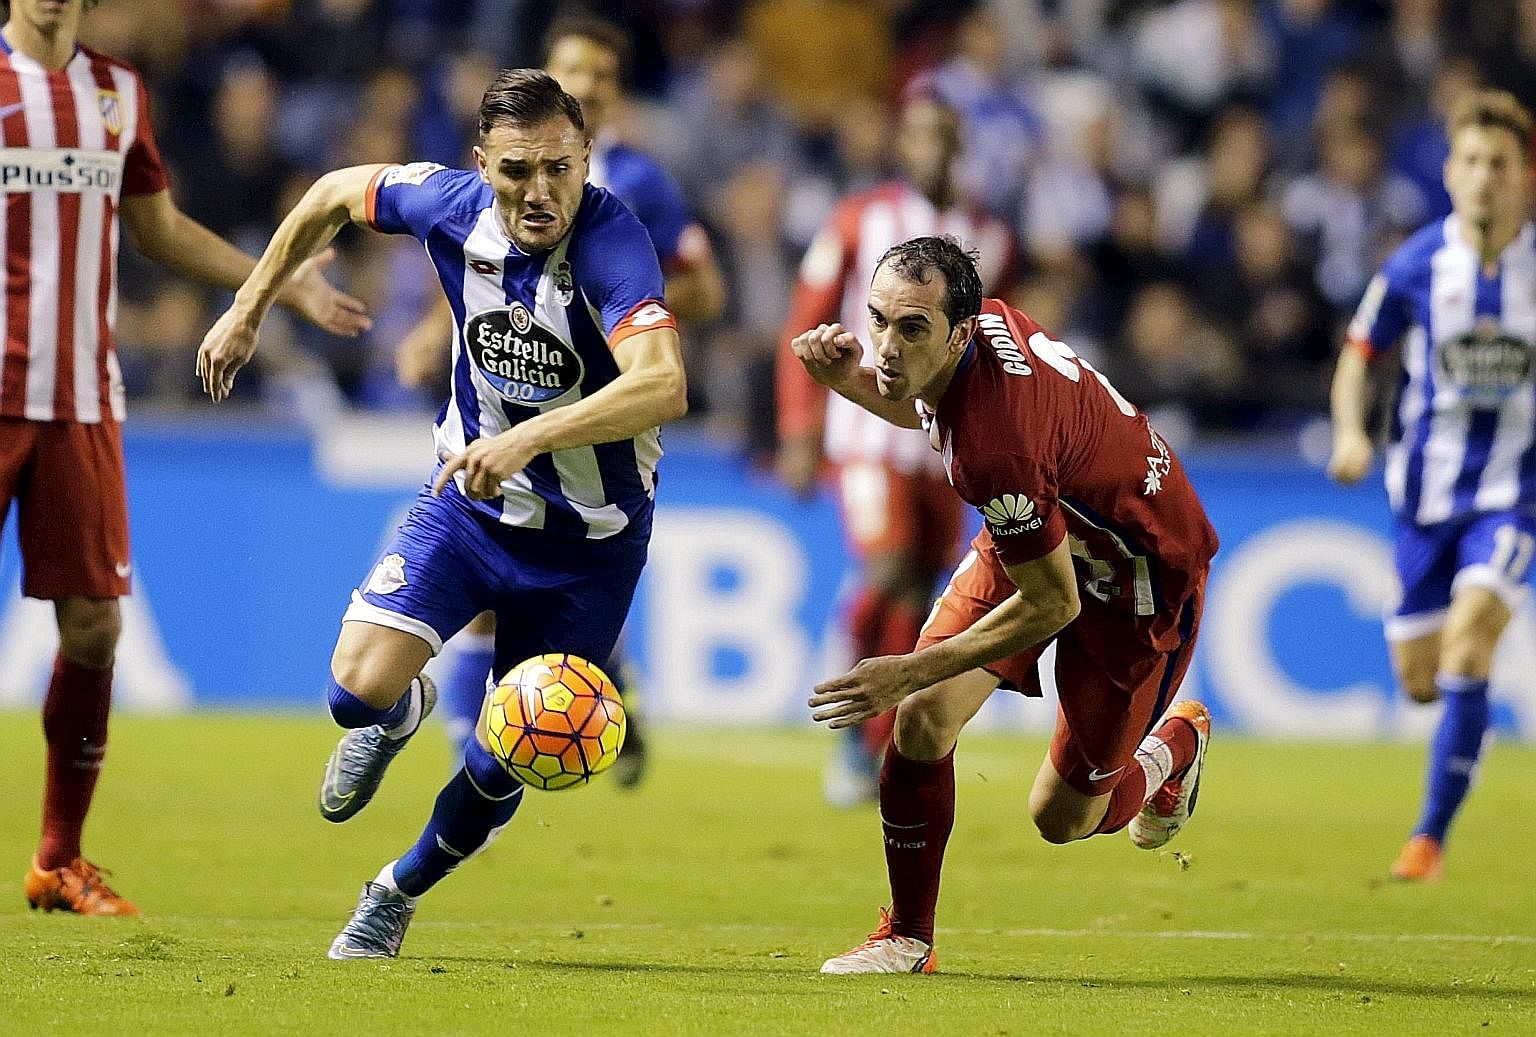 Deportivo Coruna's Lucas Perez (left) fighting for possession against Atletico Madrid's Diego Godin last year. EPL clubs do not always attract the very best Spanish players.